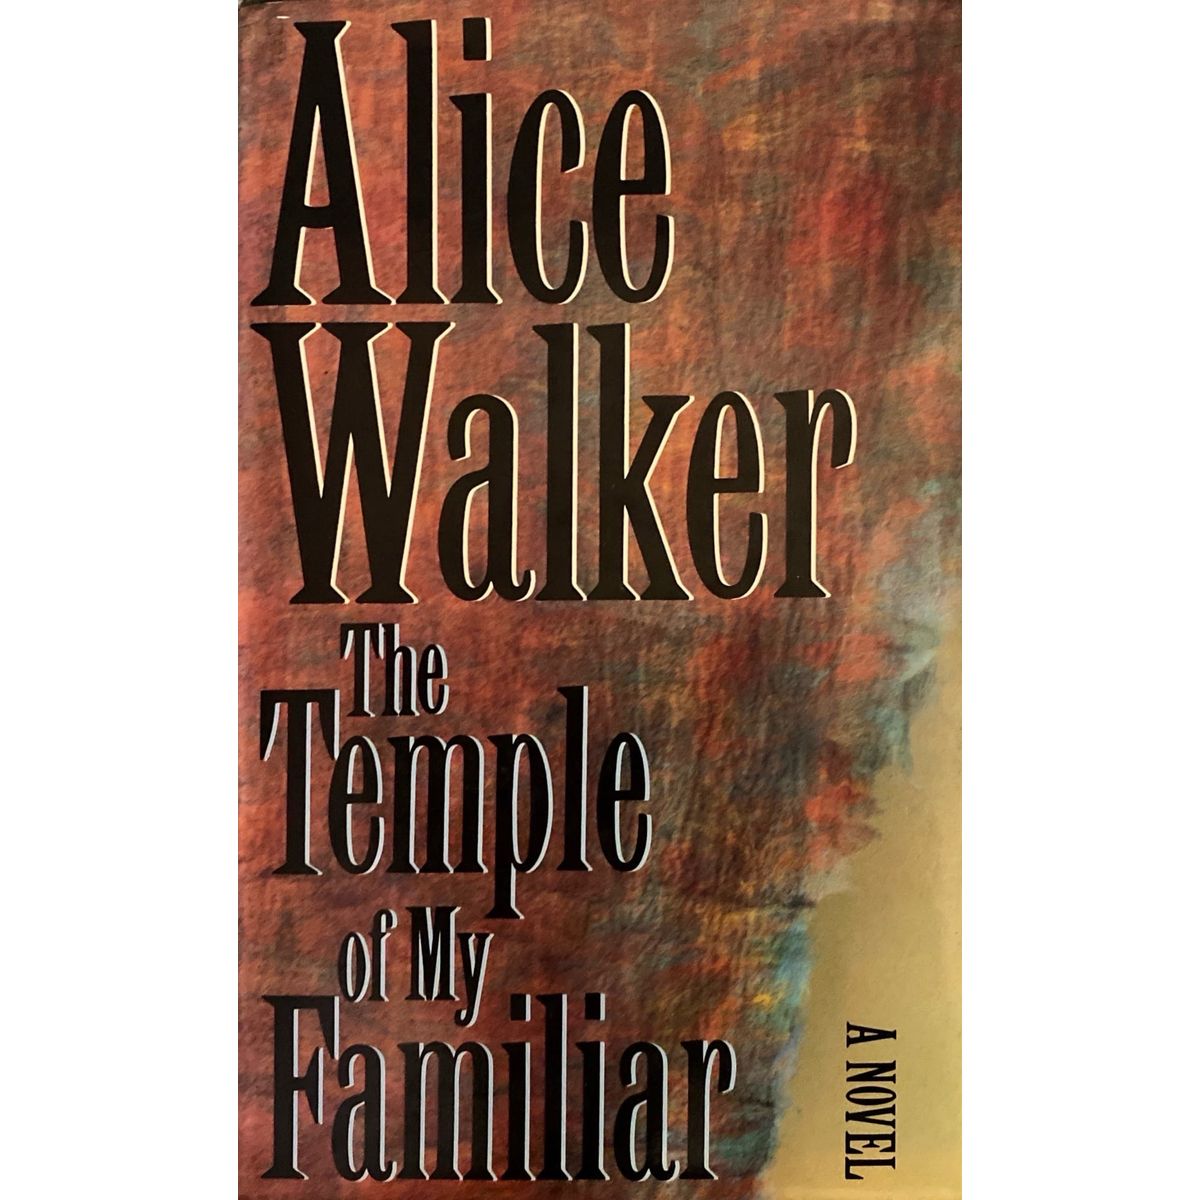 ISBN: 9780704350410 / 0704350416 - The Temple of My Familiar by Alice Walker [1989]